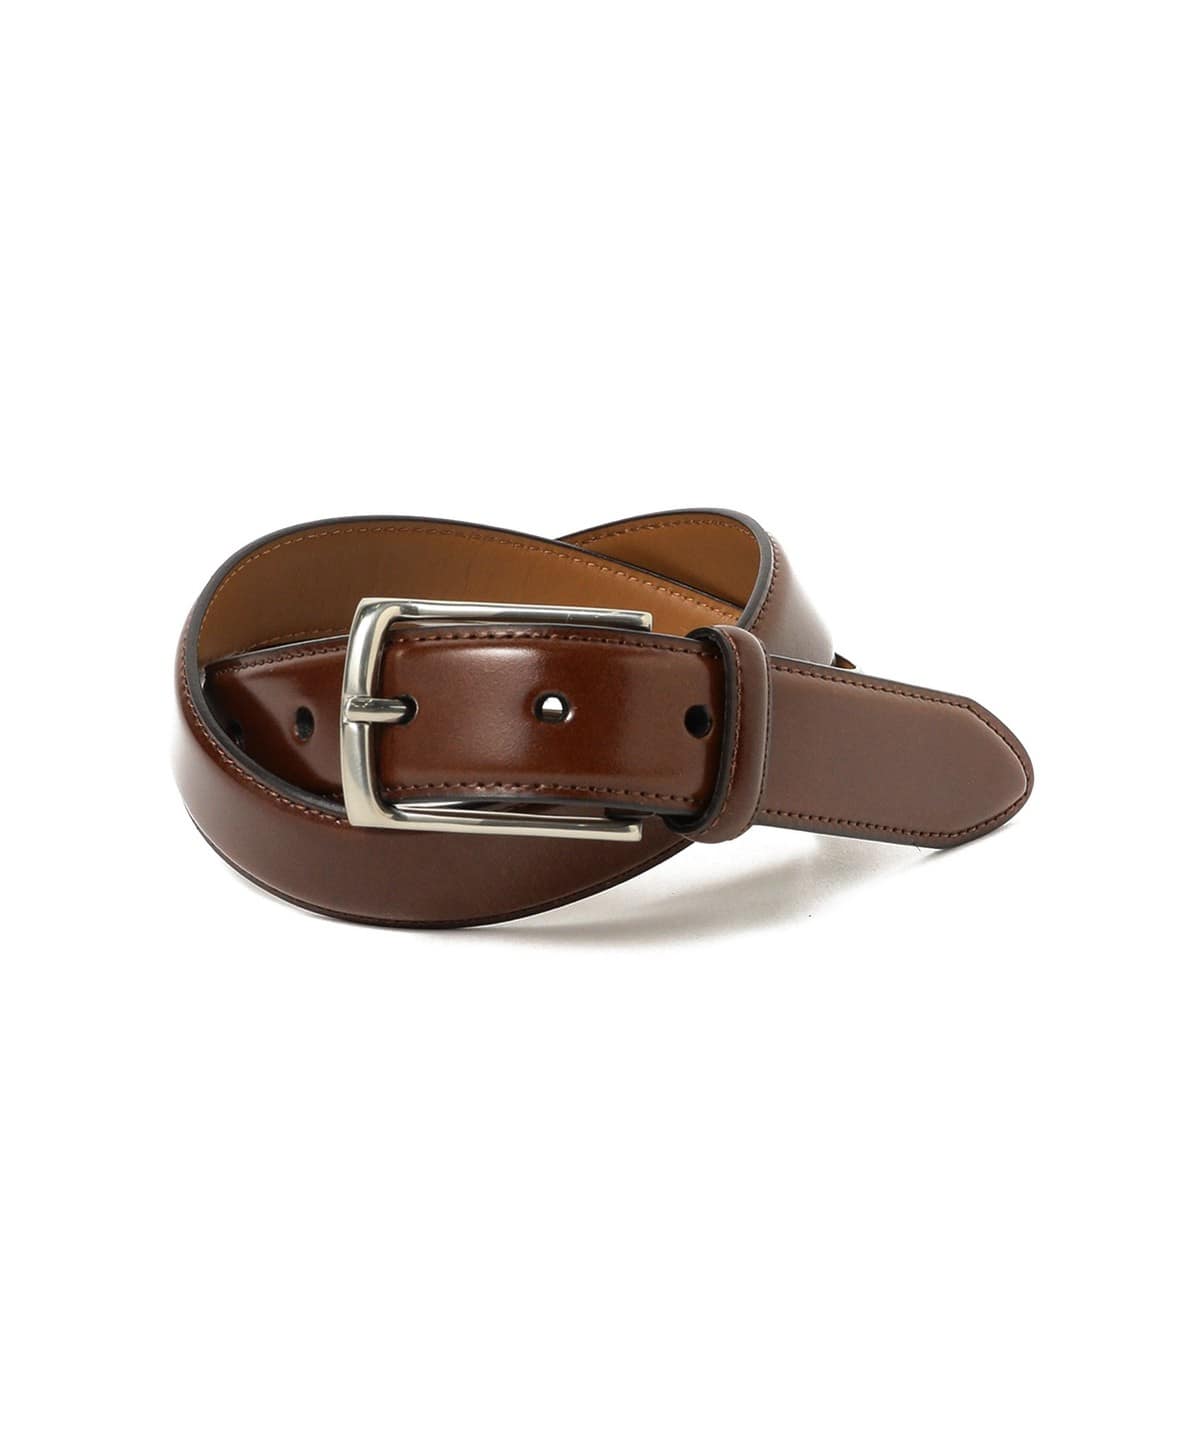 BEAMS PLUS BEAMS PLUS / BEAMS PLUS Belt (fashion goods belts and 